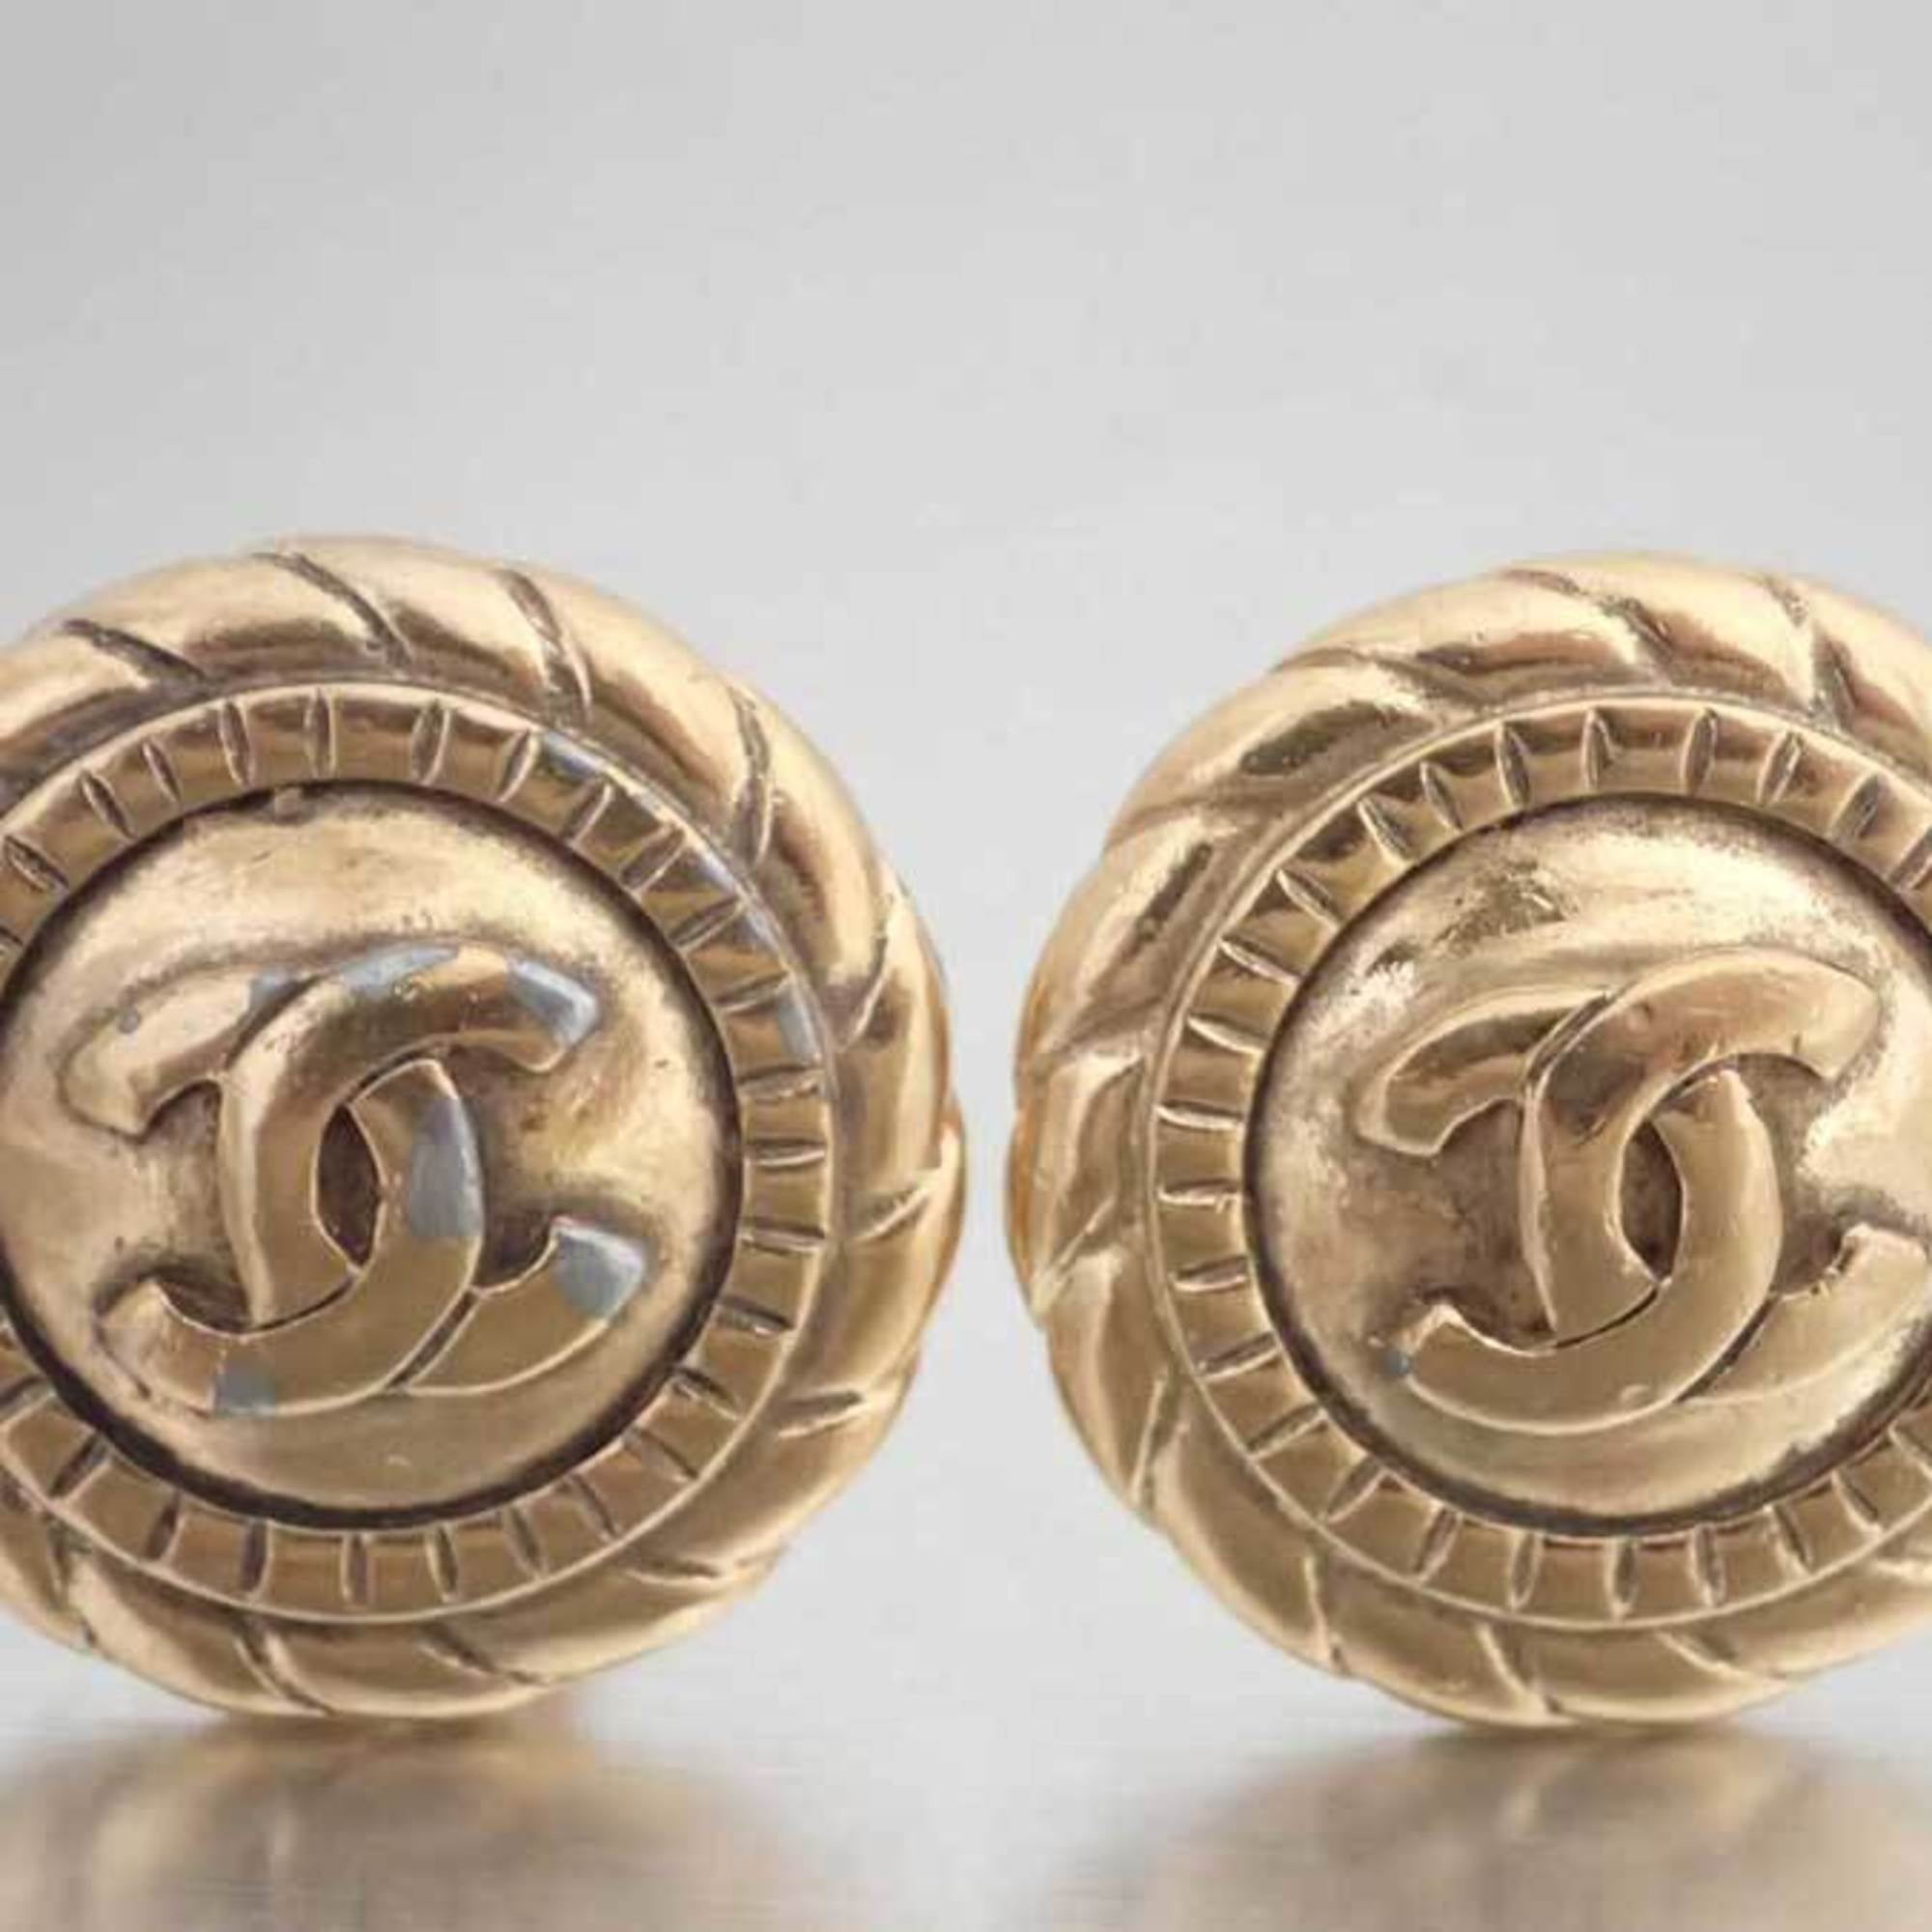 Authenticated Used Chanel CHANEL earrings here mark gold metal material  ladies 